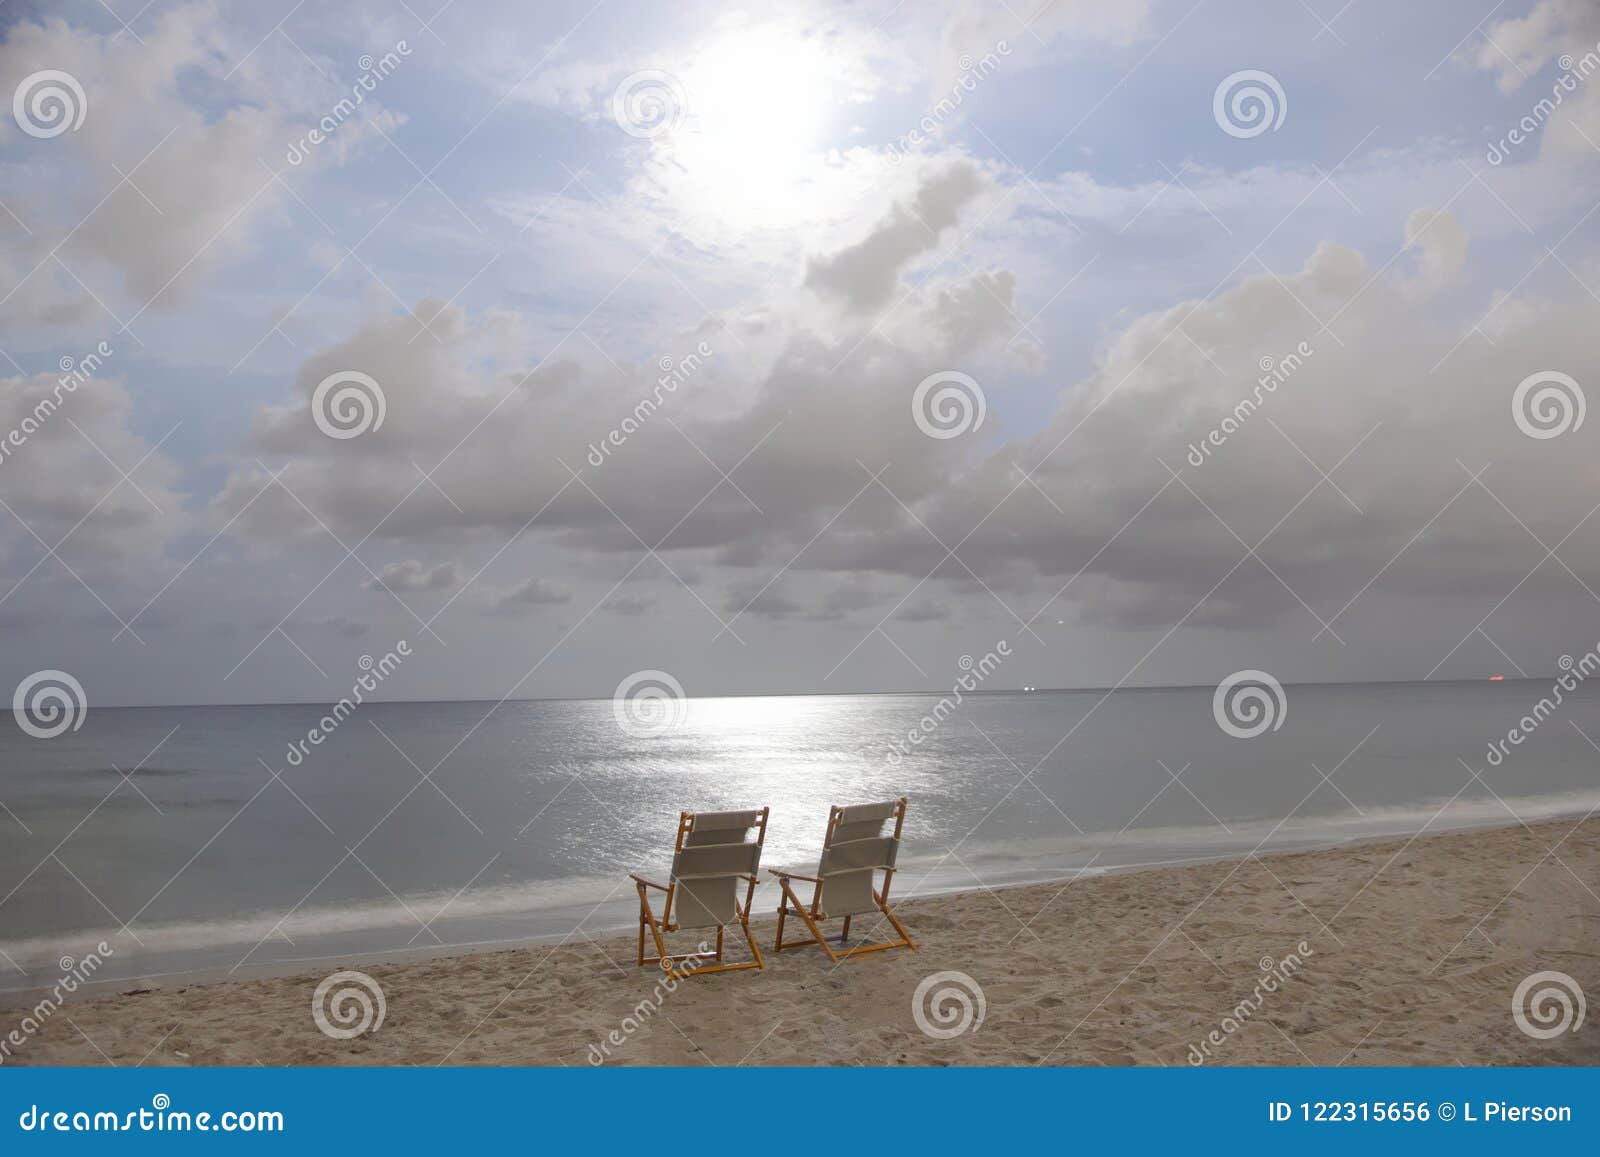 Midnight On A Florida Beach With The Chairs Ready For Their